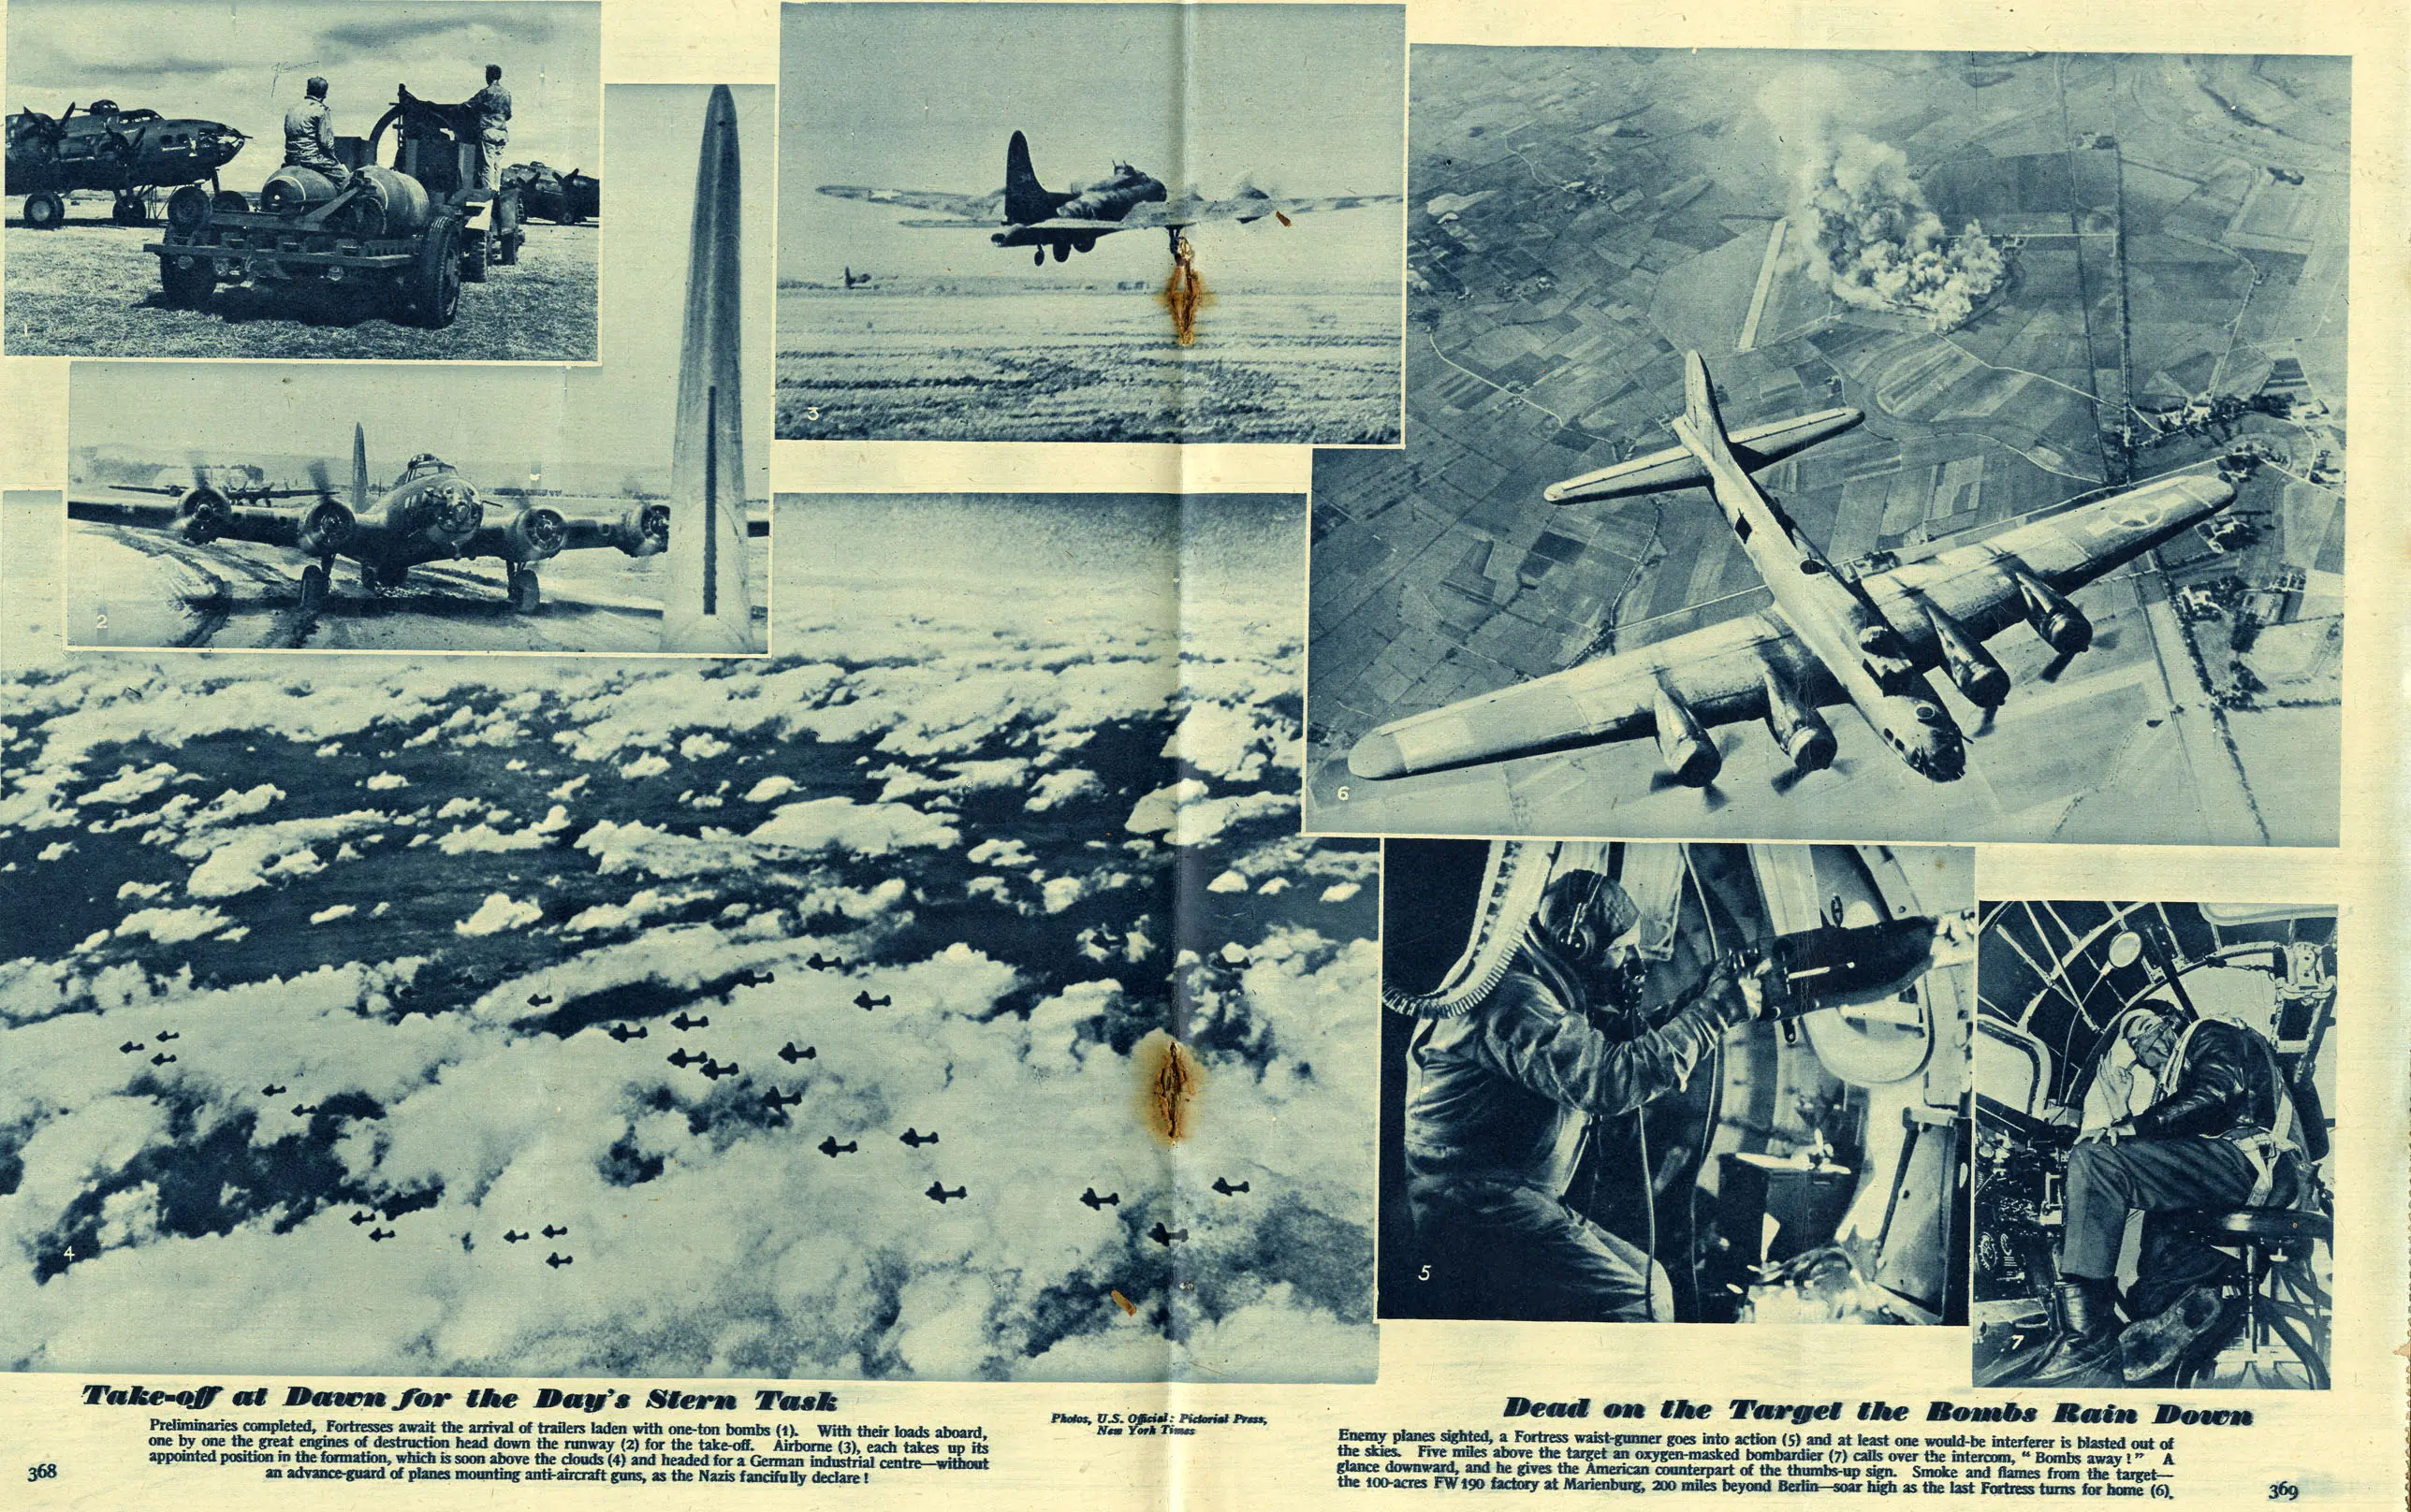 A page of The War Illustrated showing several photos of four engine bombers. One photo shows two dozen flying above the clouds, another shows a plane flying high over fields with a massive area smoking behind it. Two photos in the bottom right show some of the crew inside one of the bombers.